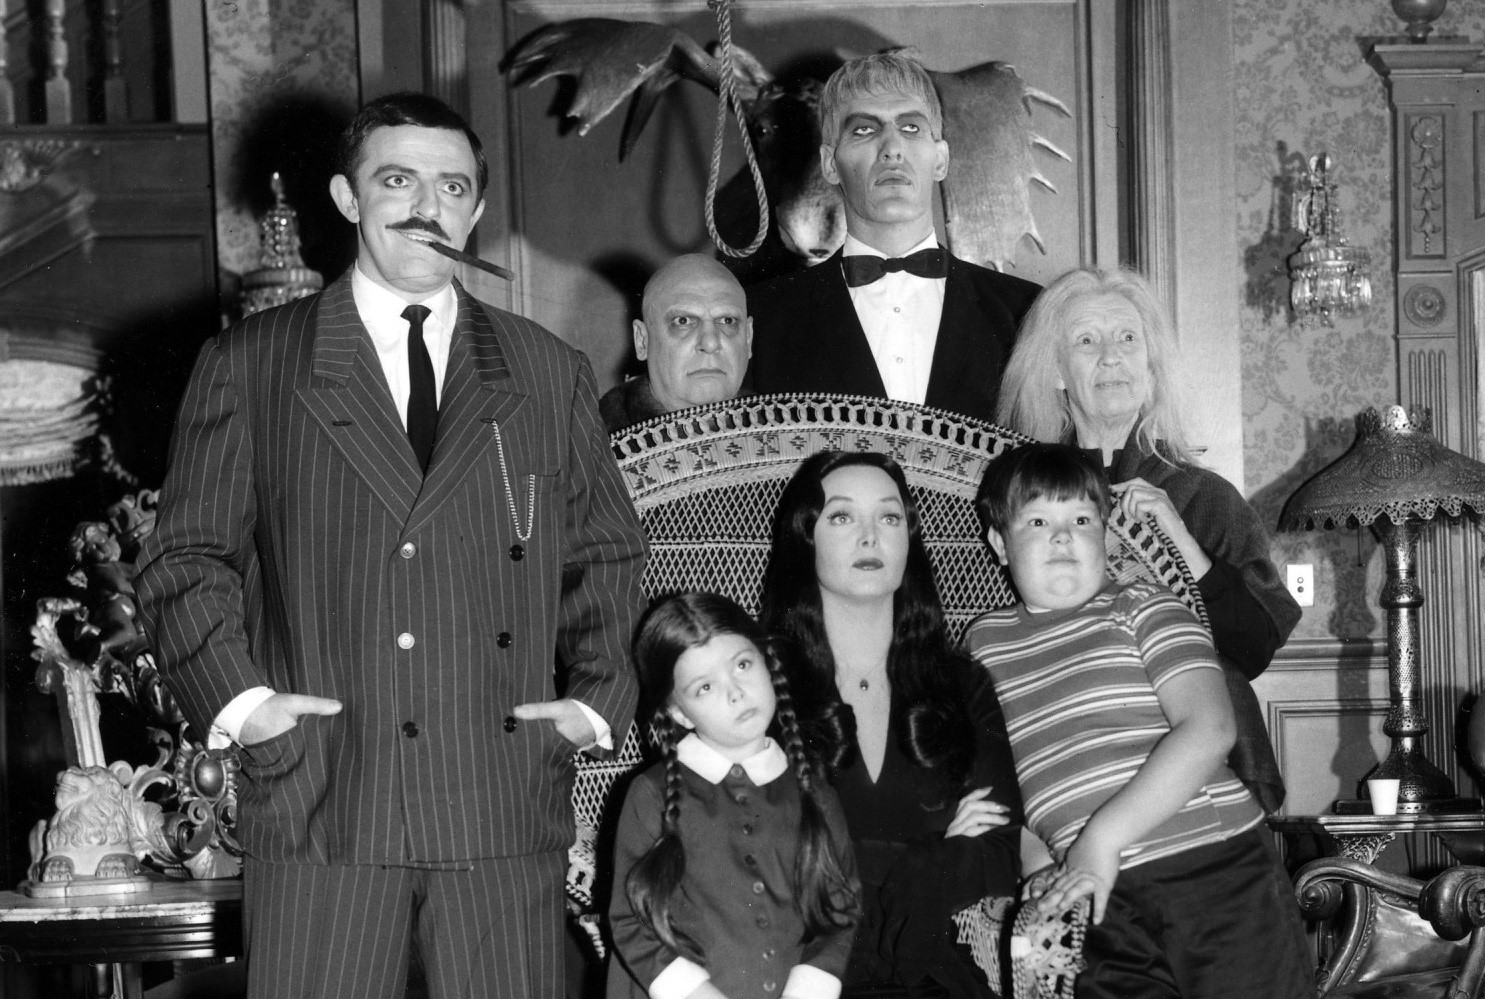 If You’ve Watched 18/24 of These TV Shows, Then You Qualify for a Senior Discount The Addams Family